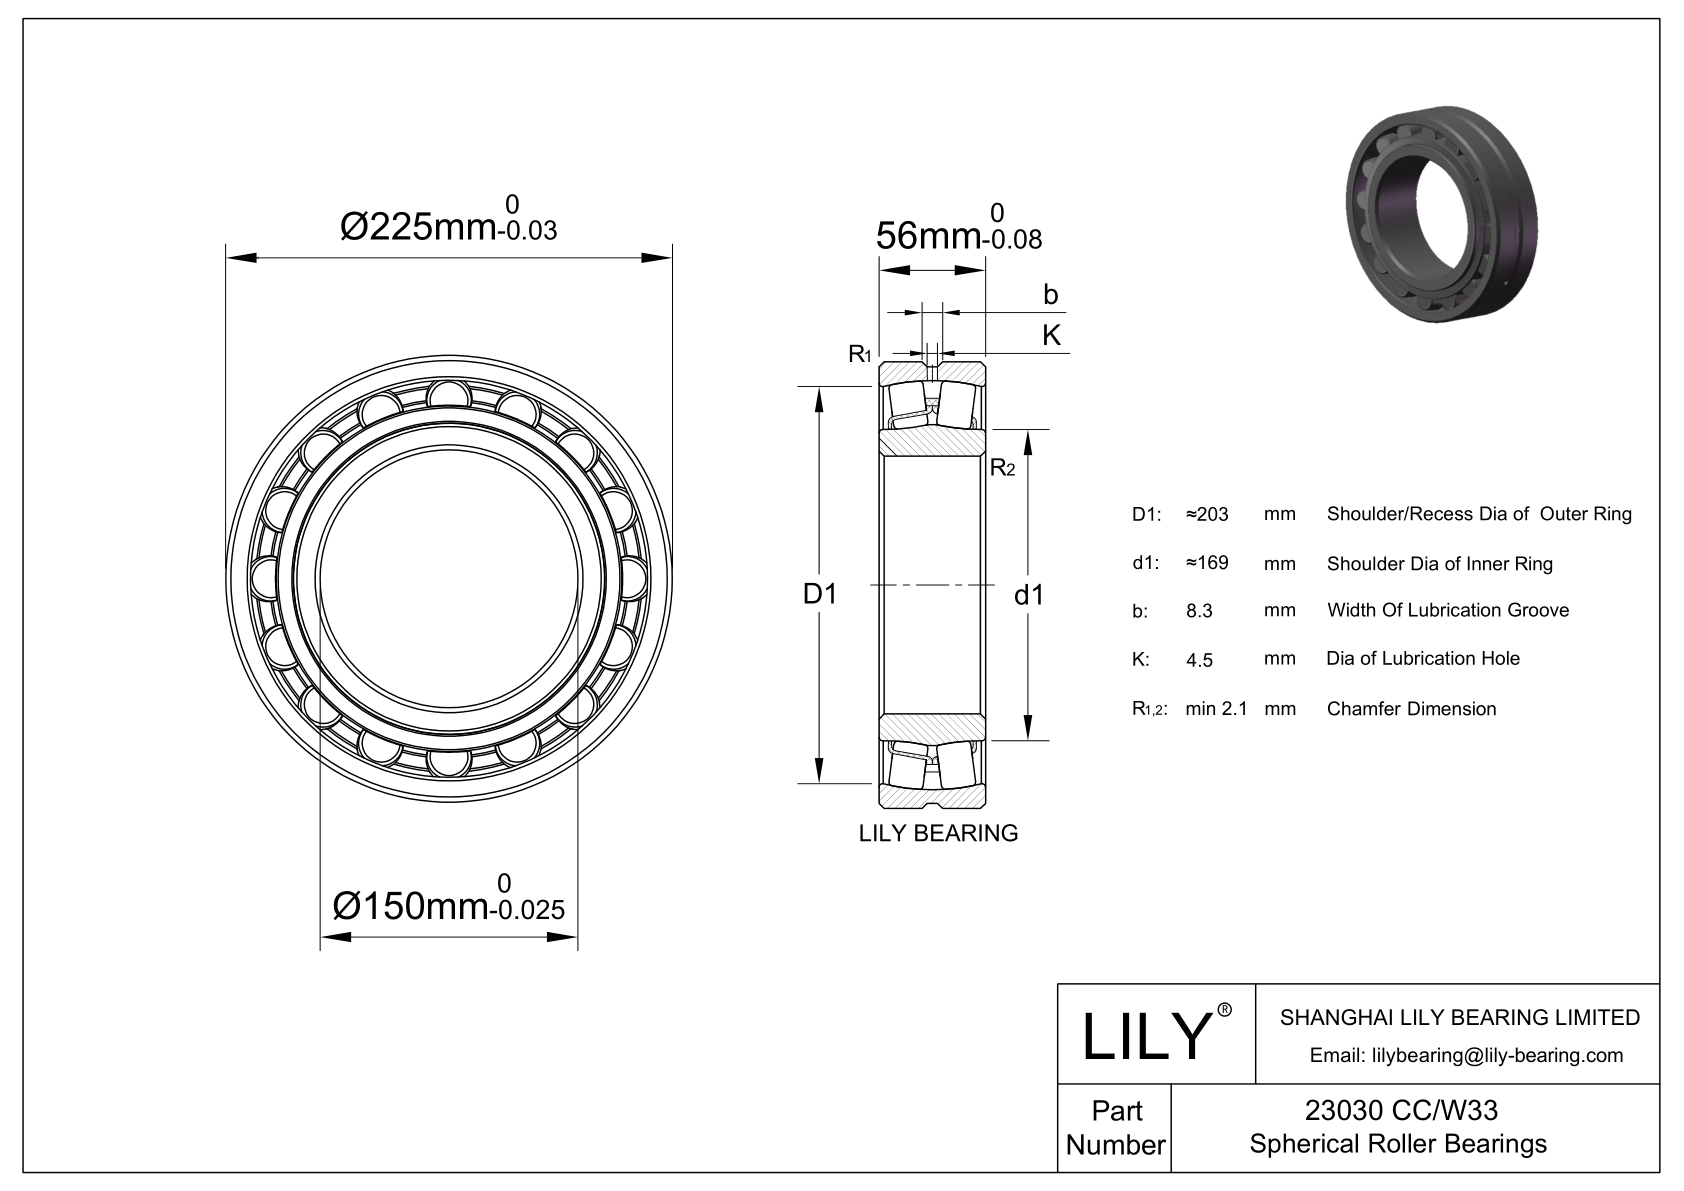 23030 CC/W33 Double Row Spherical Roller Bearing cad drawing